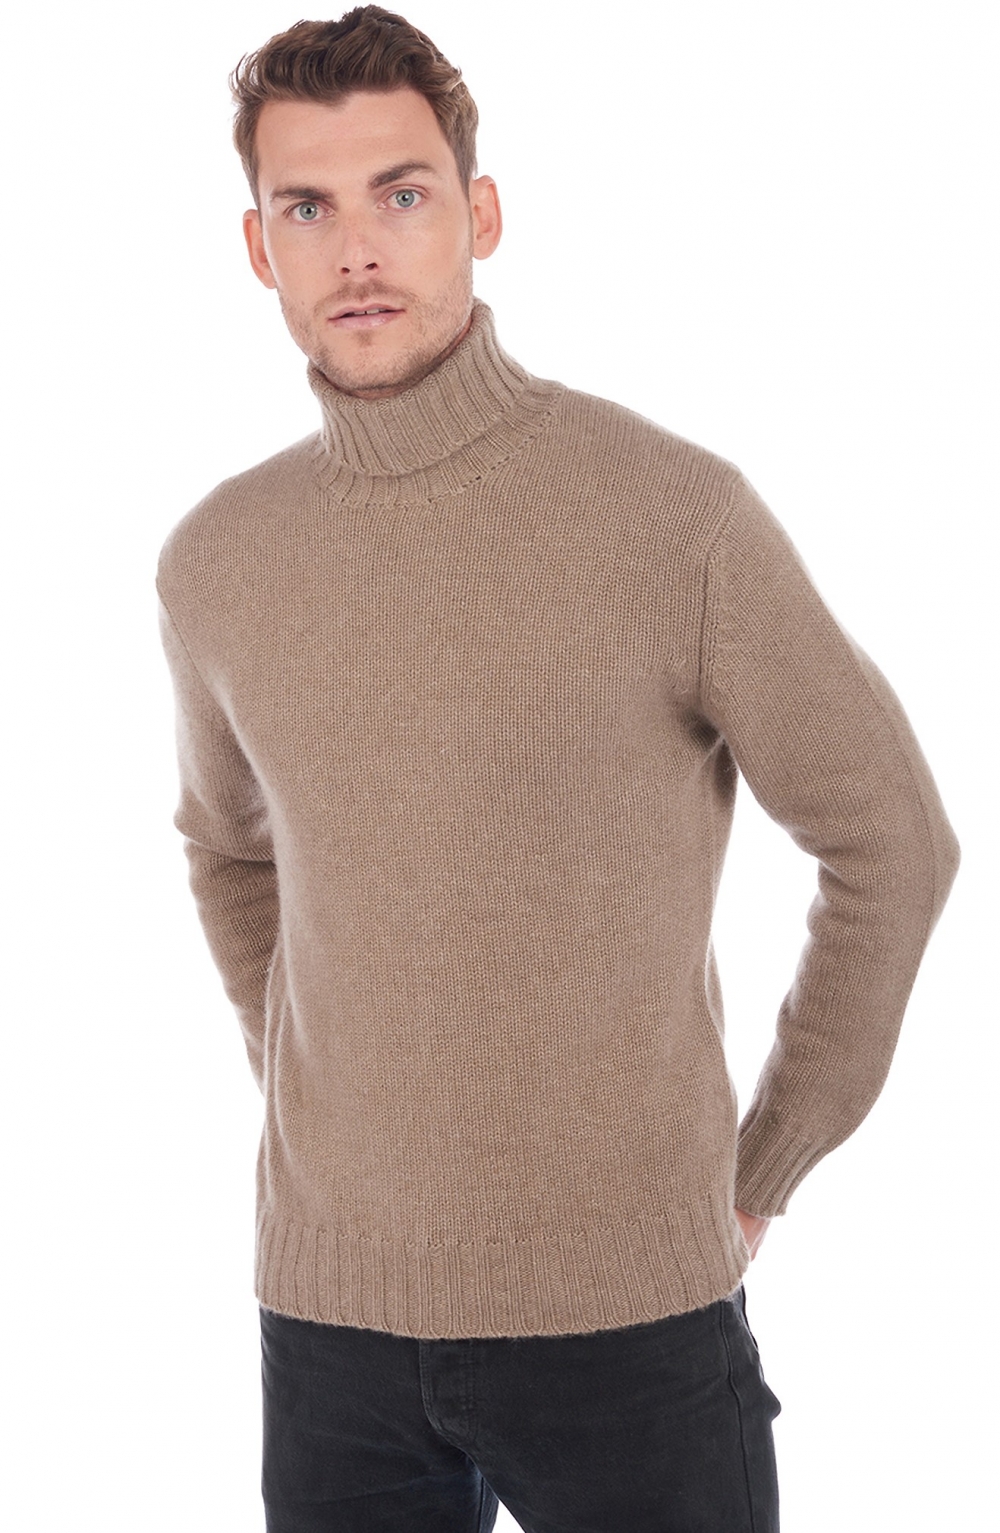 Cachemire pull homme col roule achille natural brown l